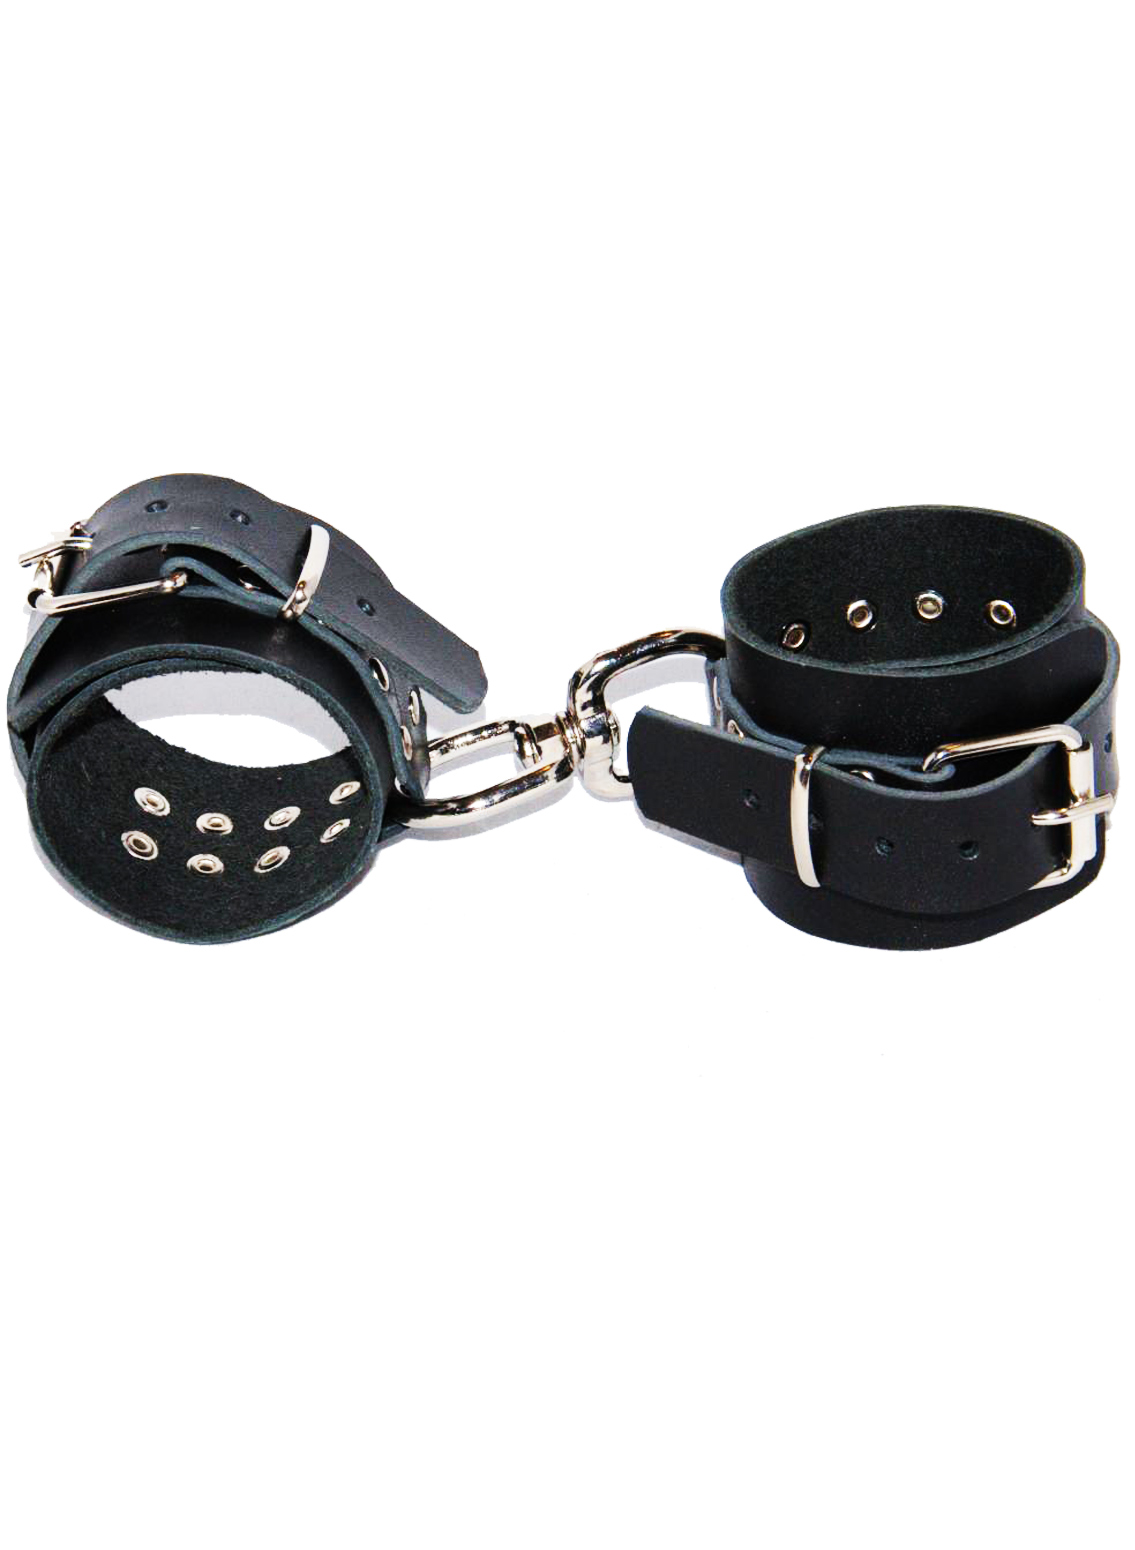 Relaxxx Leather Handcuffs (5137)